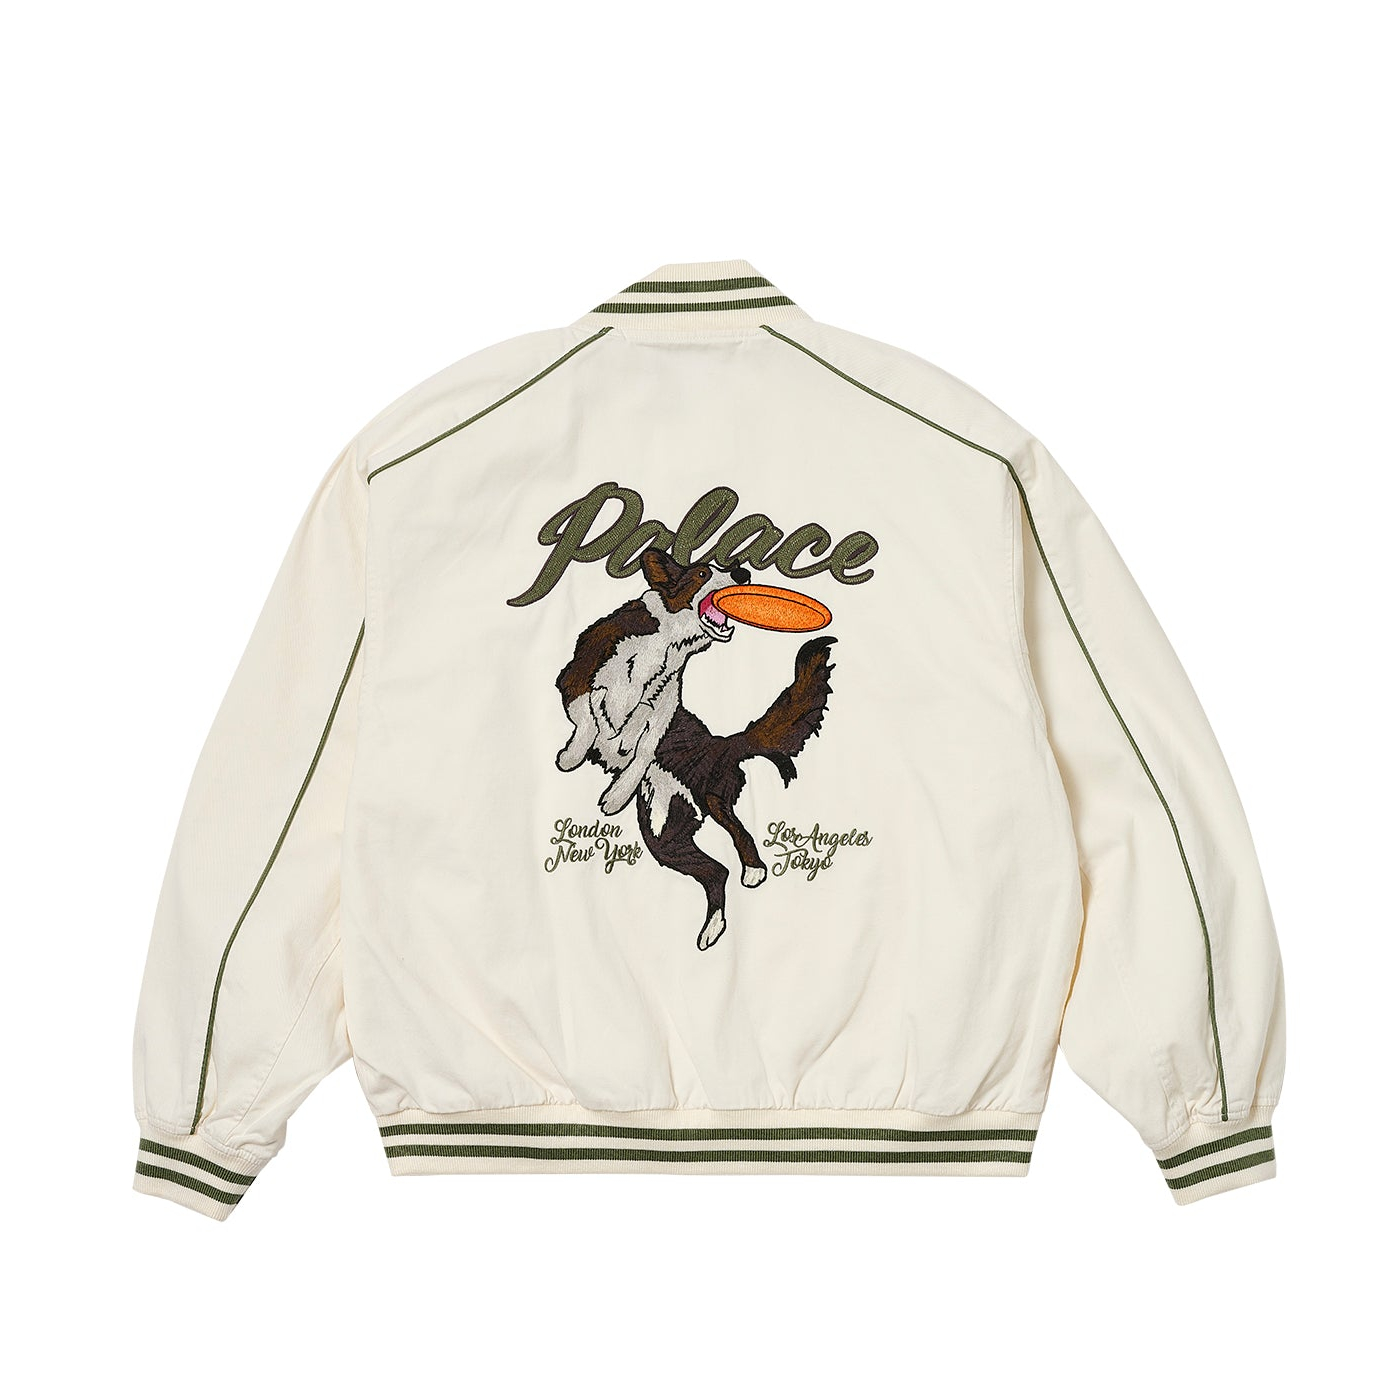 Thumbnail CATCH IT BOMBER JACKET CEMENT one color